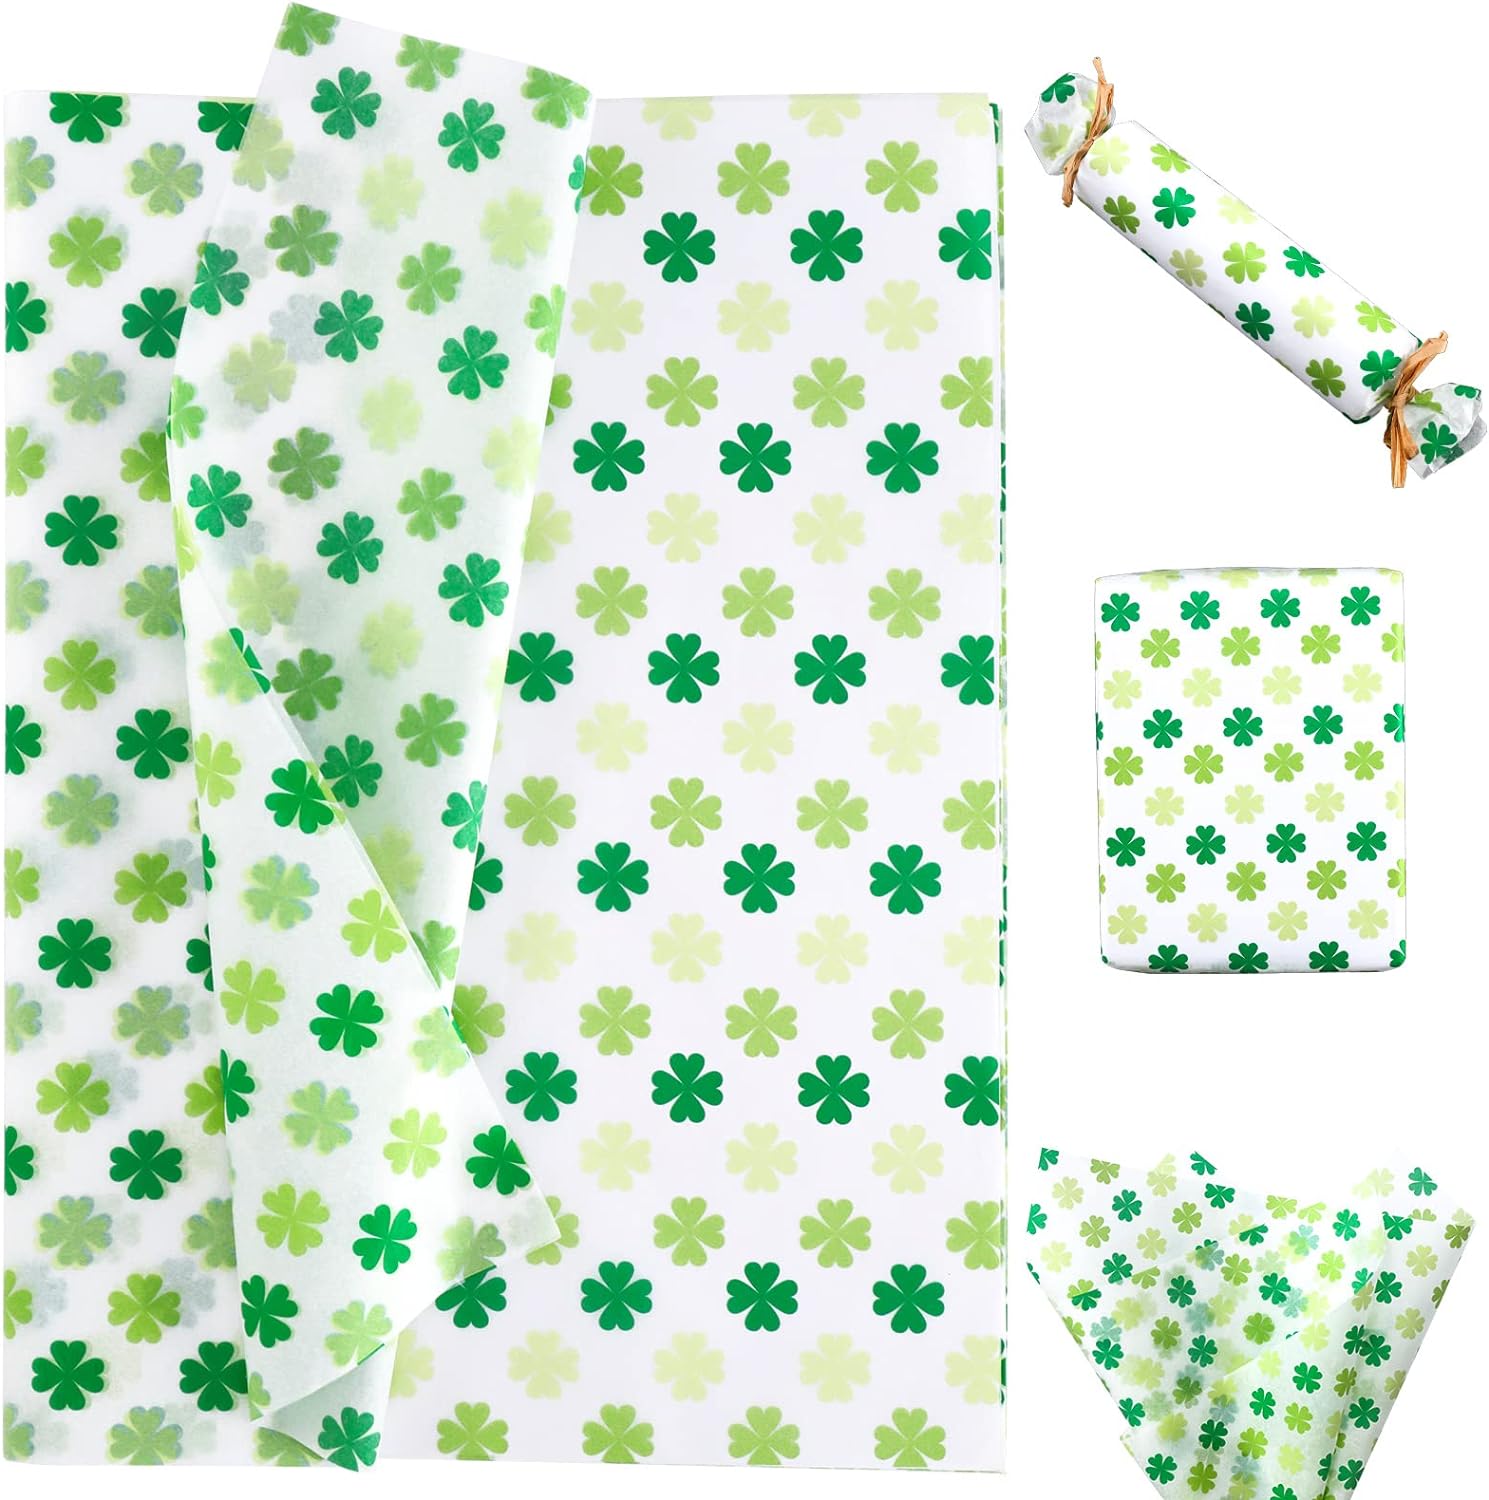 Whaline 100 Sheets St Patrick' Day Tissue Paper Clover Green White Gift Wrapping Paper Shamrock Pattern Decorative Art Paper for DIY Craft Birthday Holiday Decoration, 14 x 20 Inch